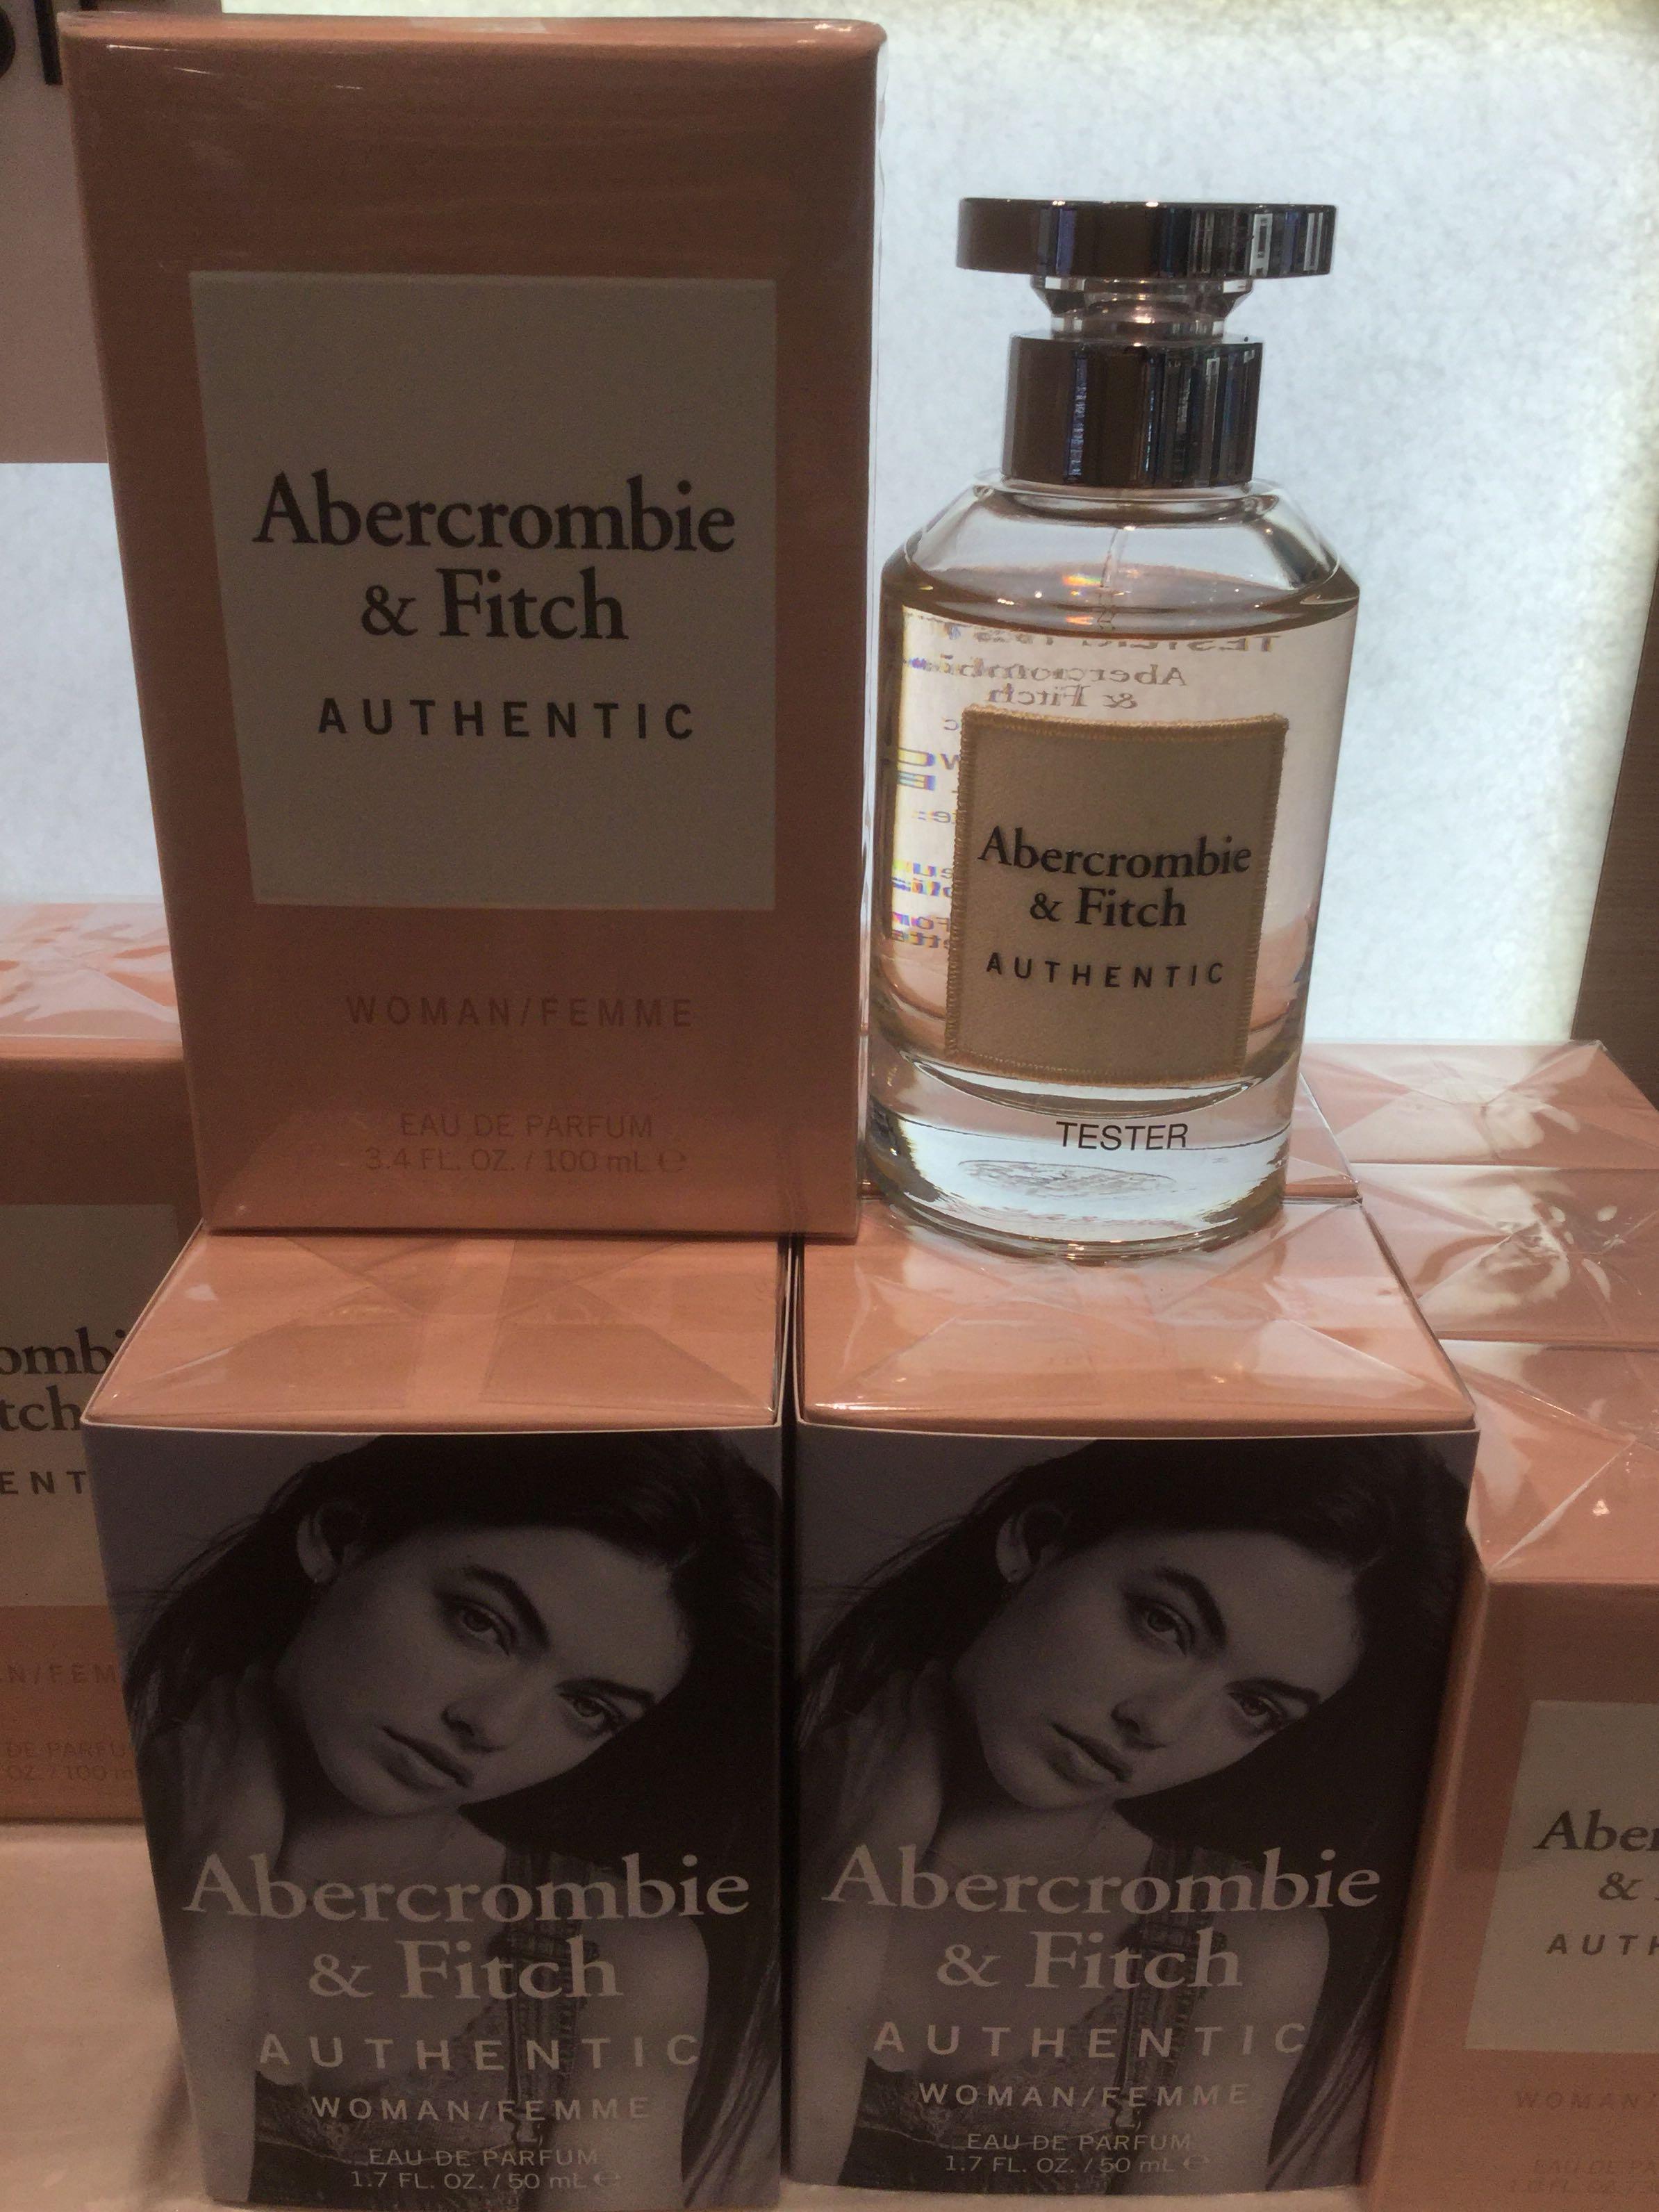 a&f authentic perfume